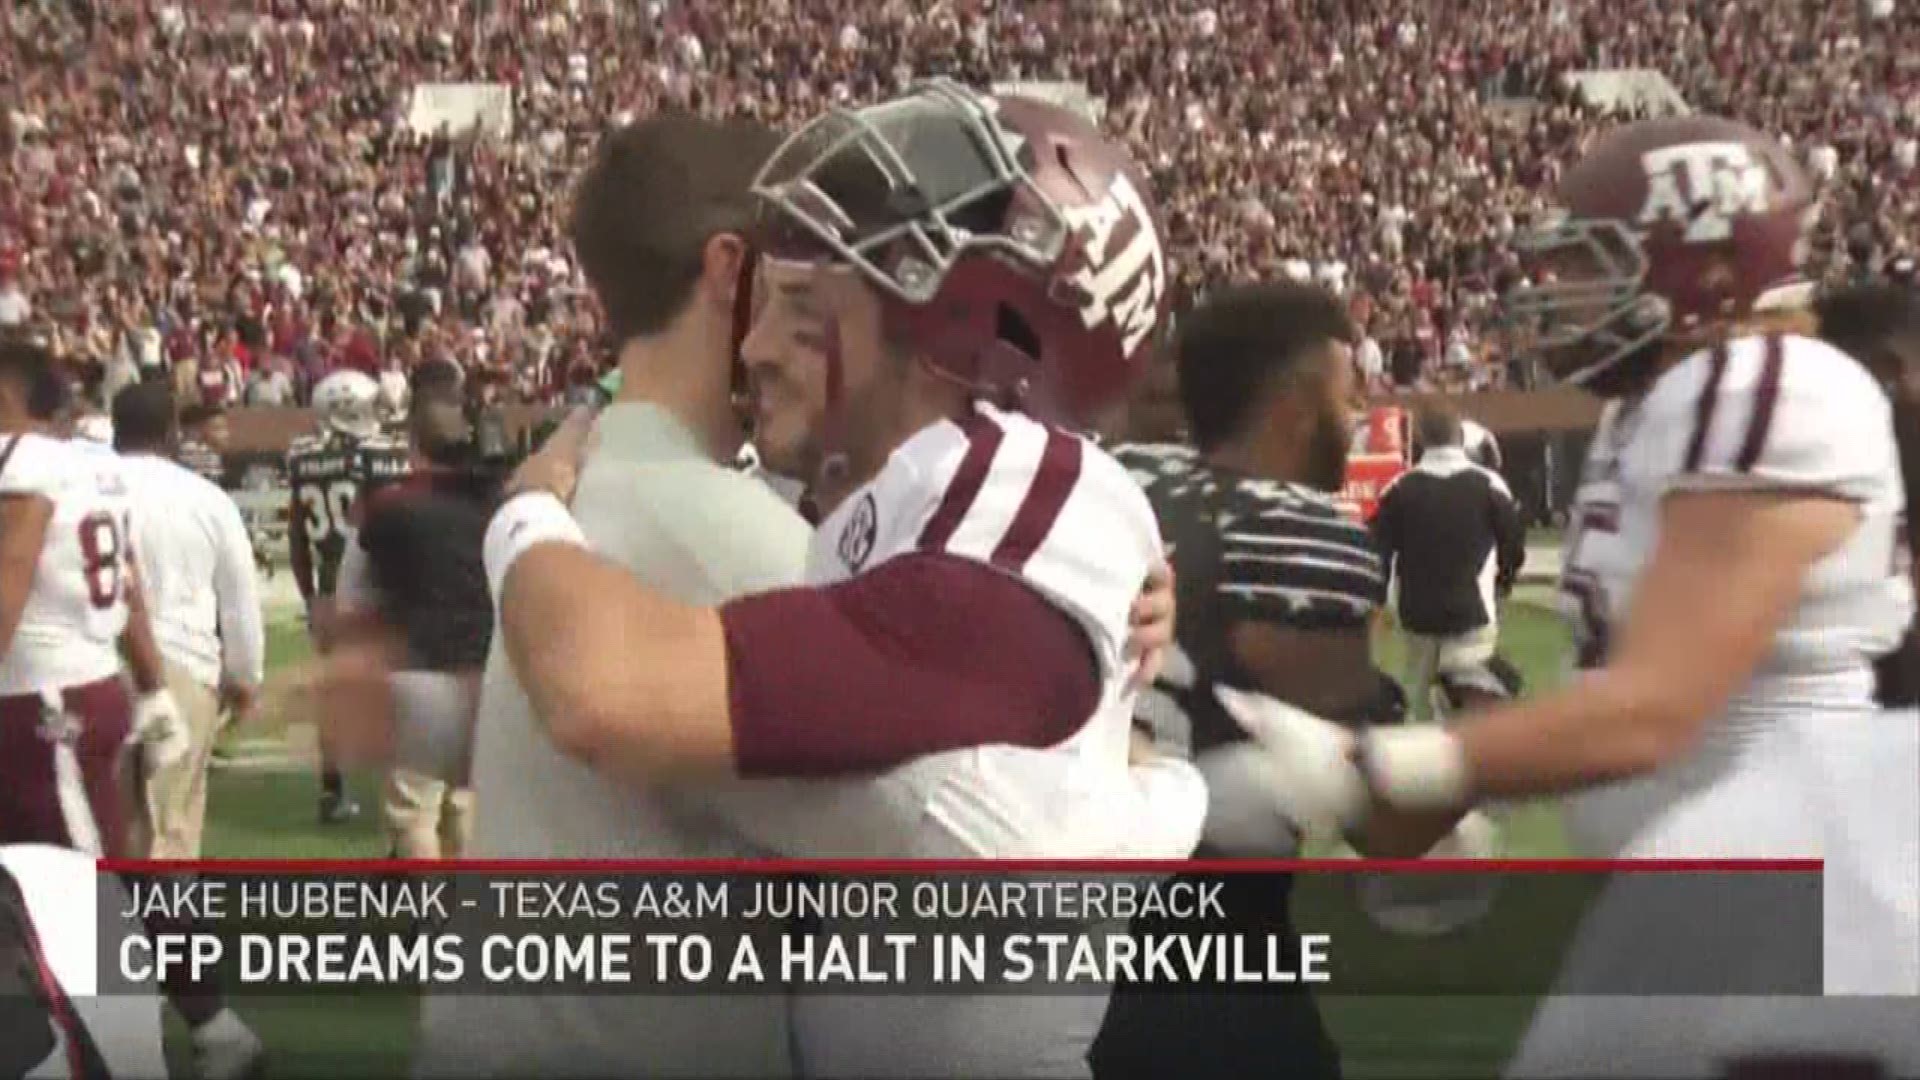 CFP dreams come to a halt in Starkville